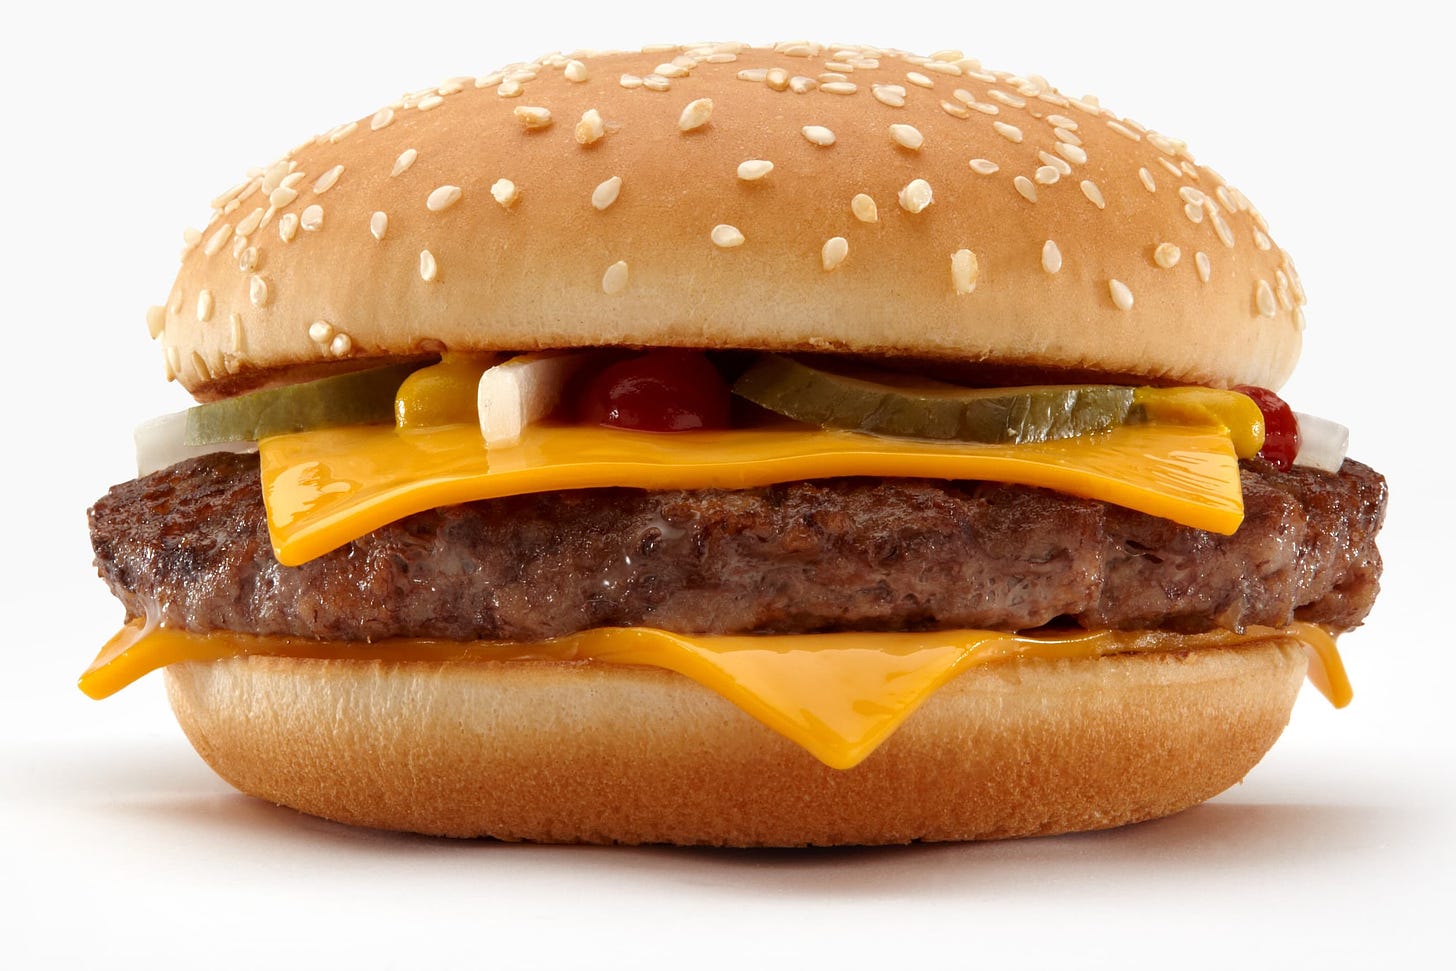 McDonald's Quarter Pounder is getting bigger (really!)